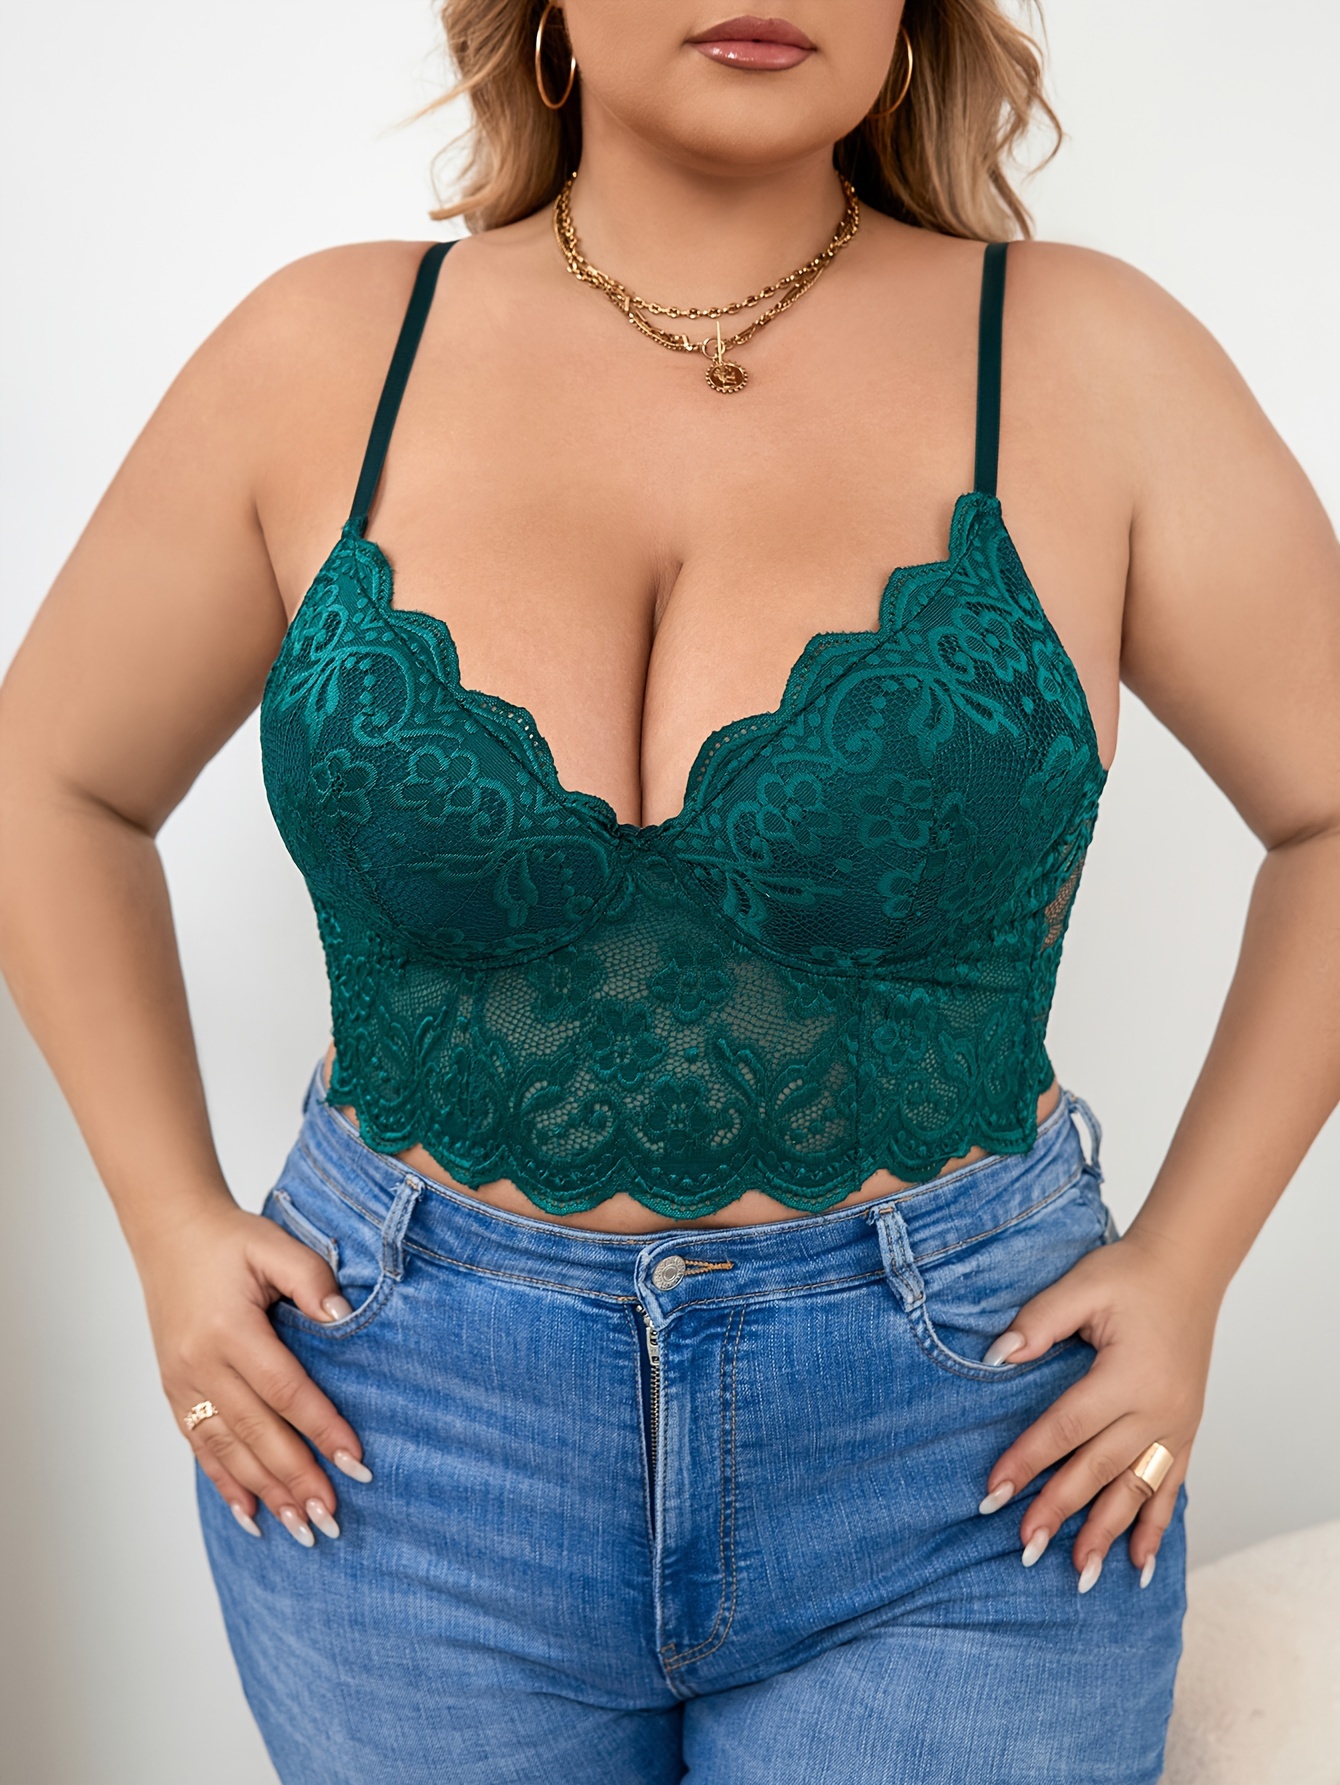 Plus Size Bra Pluse Size Lingerie for Womens Underwire Bra Lace Floral Bra  Unlined Unlined Plus Size Full Coverage Bra (Green, 42/95D)